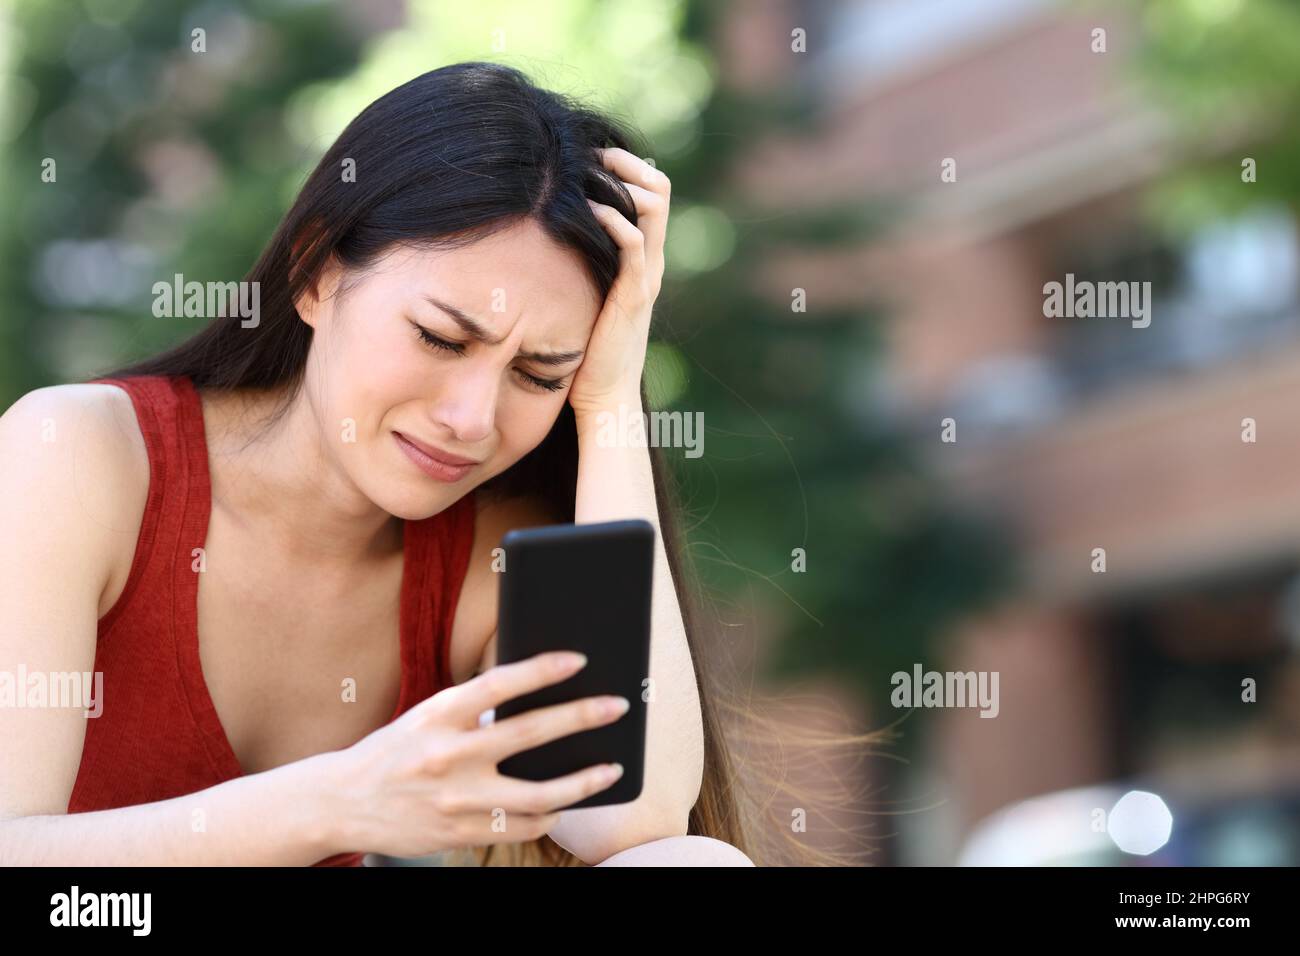 Worried asian woman checking smartphone in the street Stock Photo